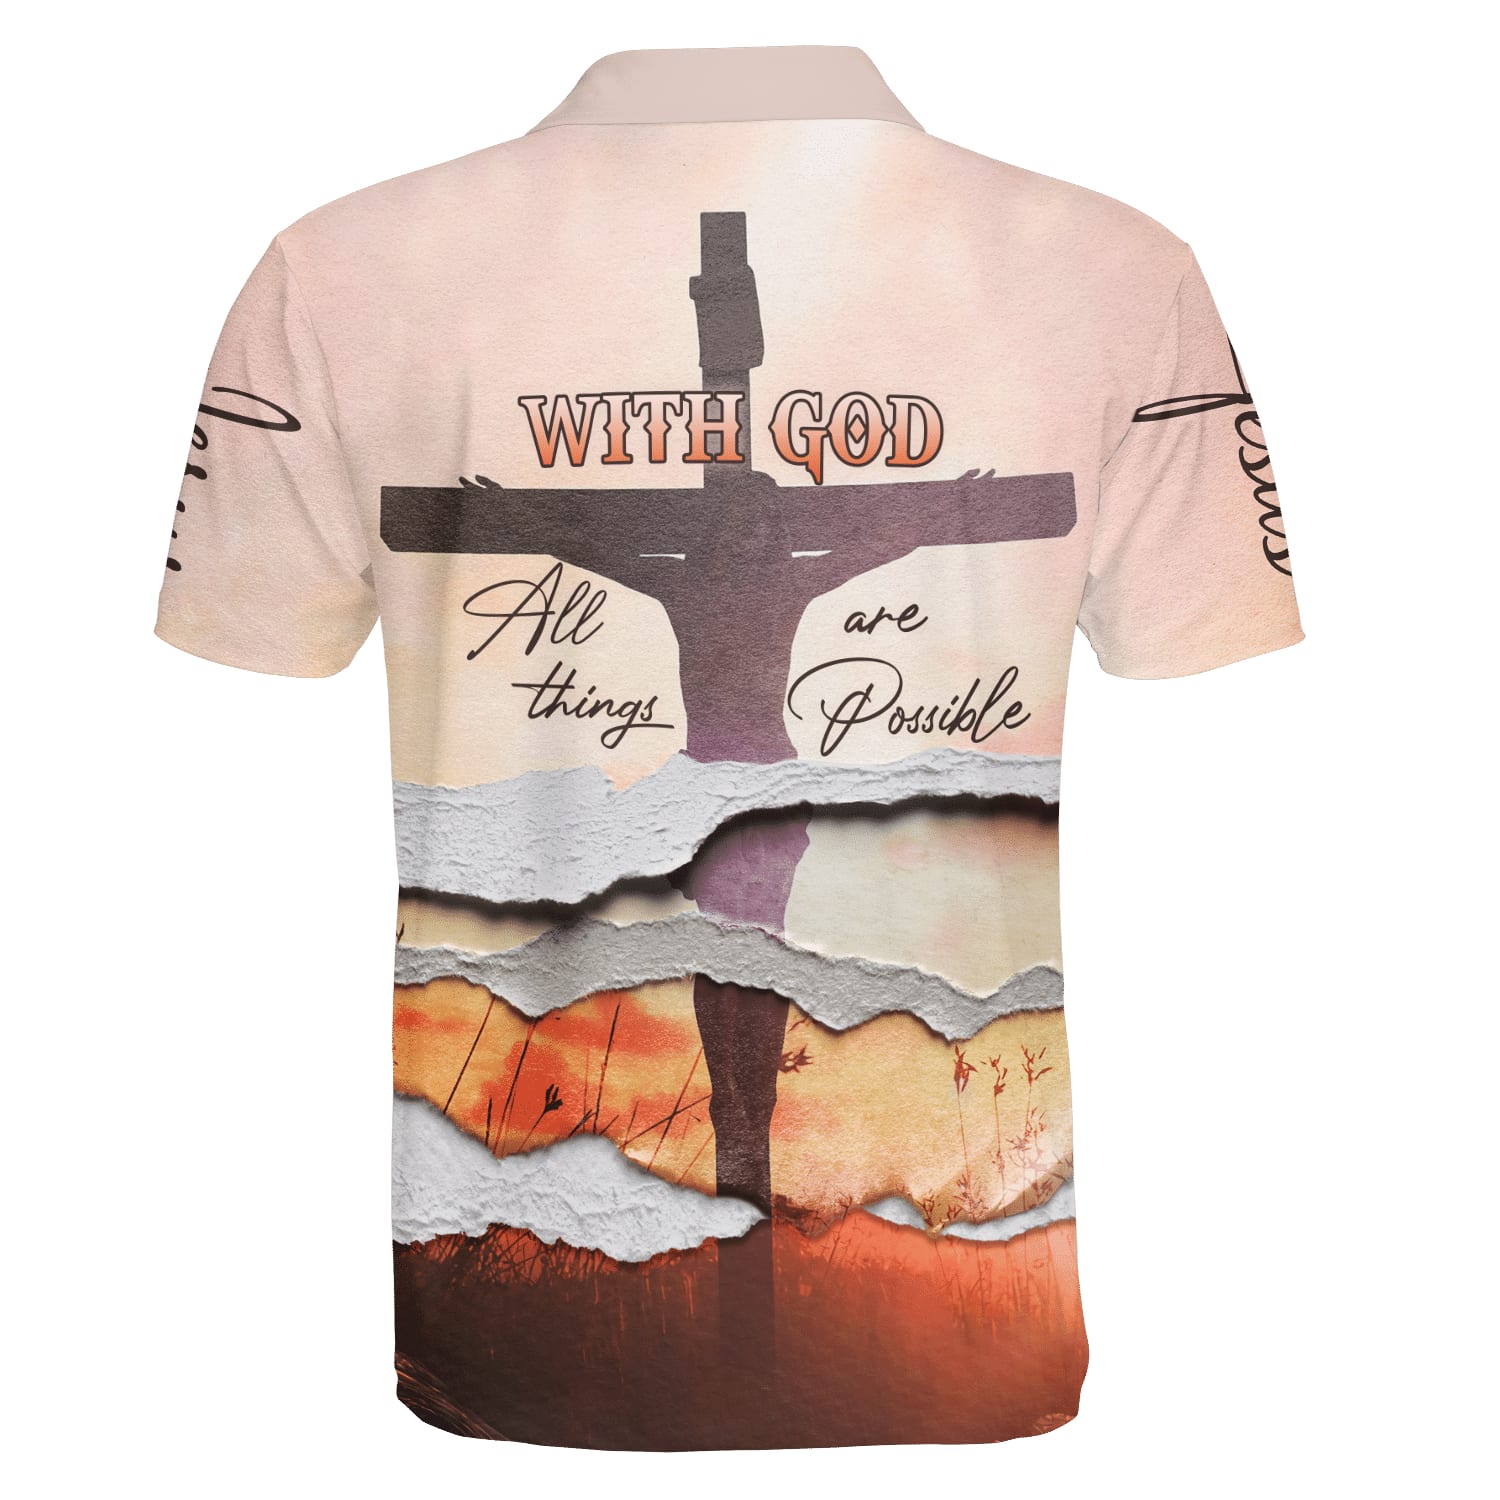 With God All Things Are Possible Polo Shirt - Christian Shirts & Shorts